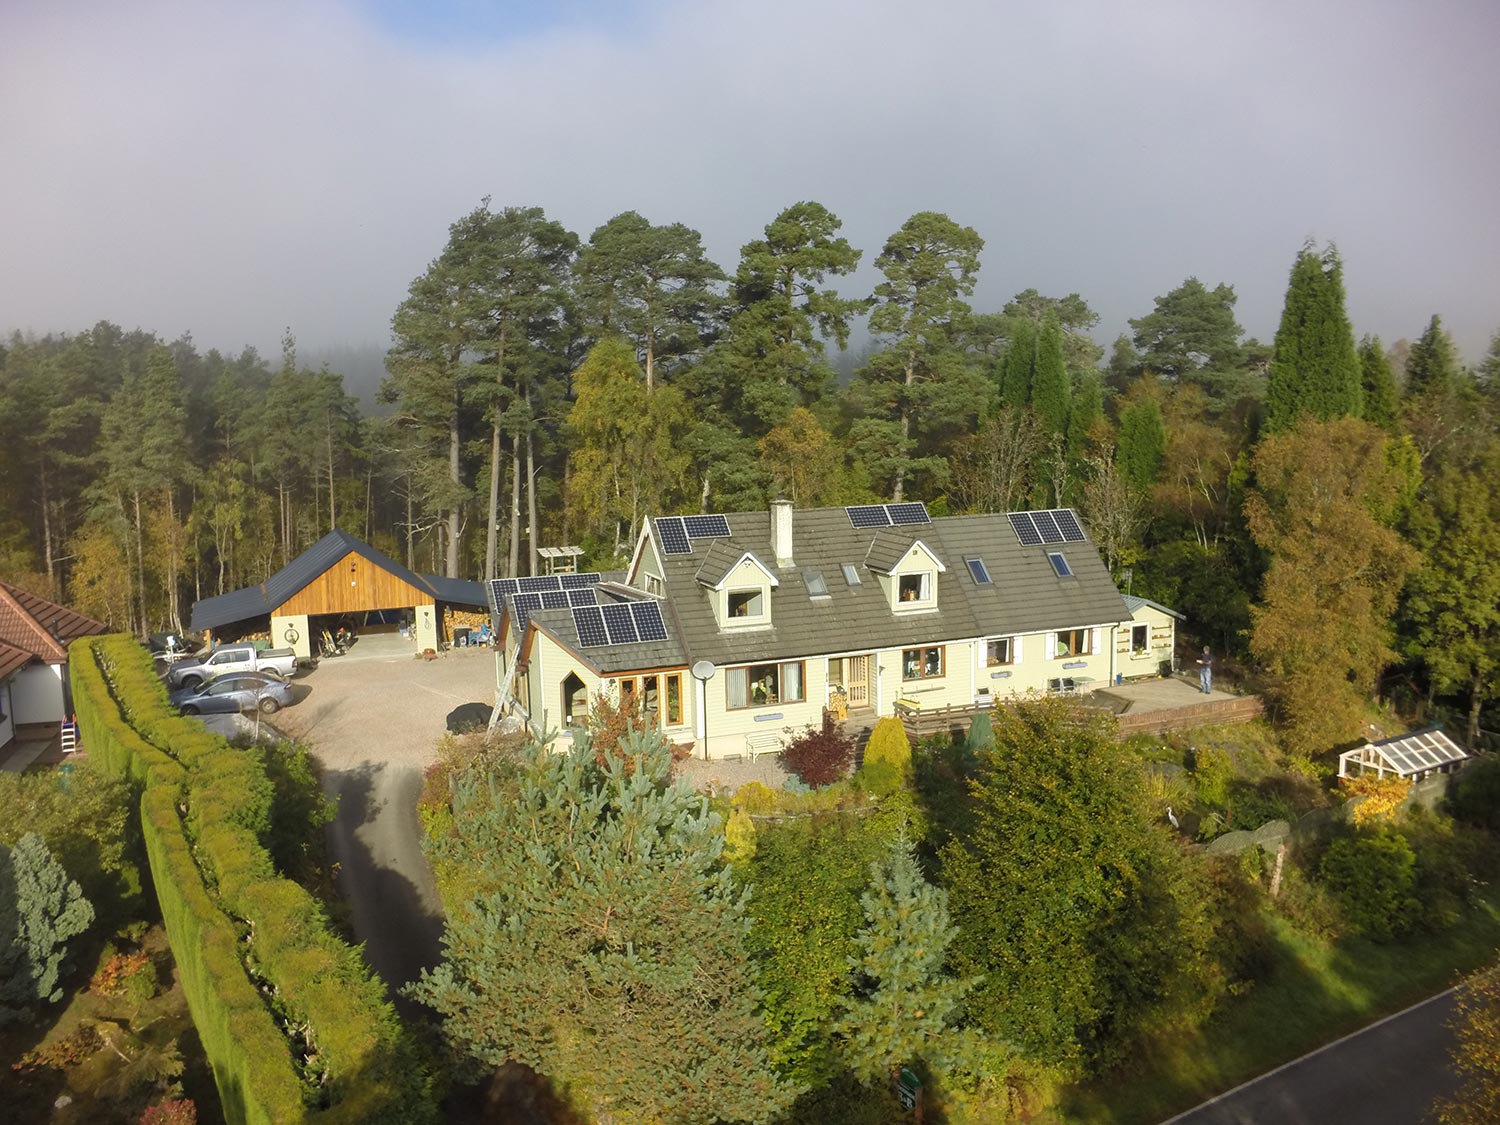 A view of Woodside B&B from the air with the natural forest behind our home